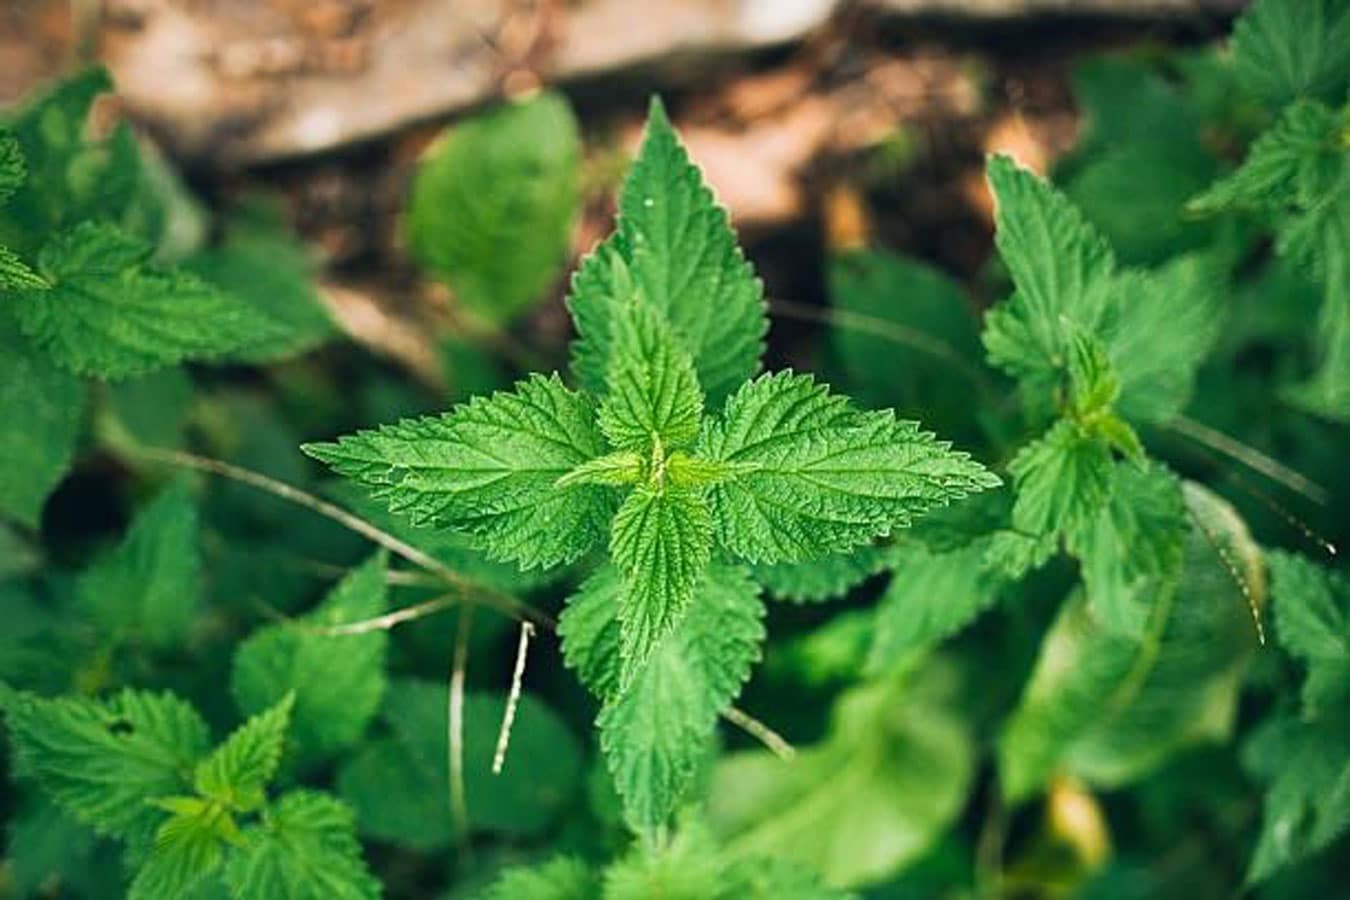 Research explores potential of nettle as a functional food